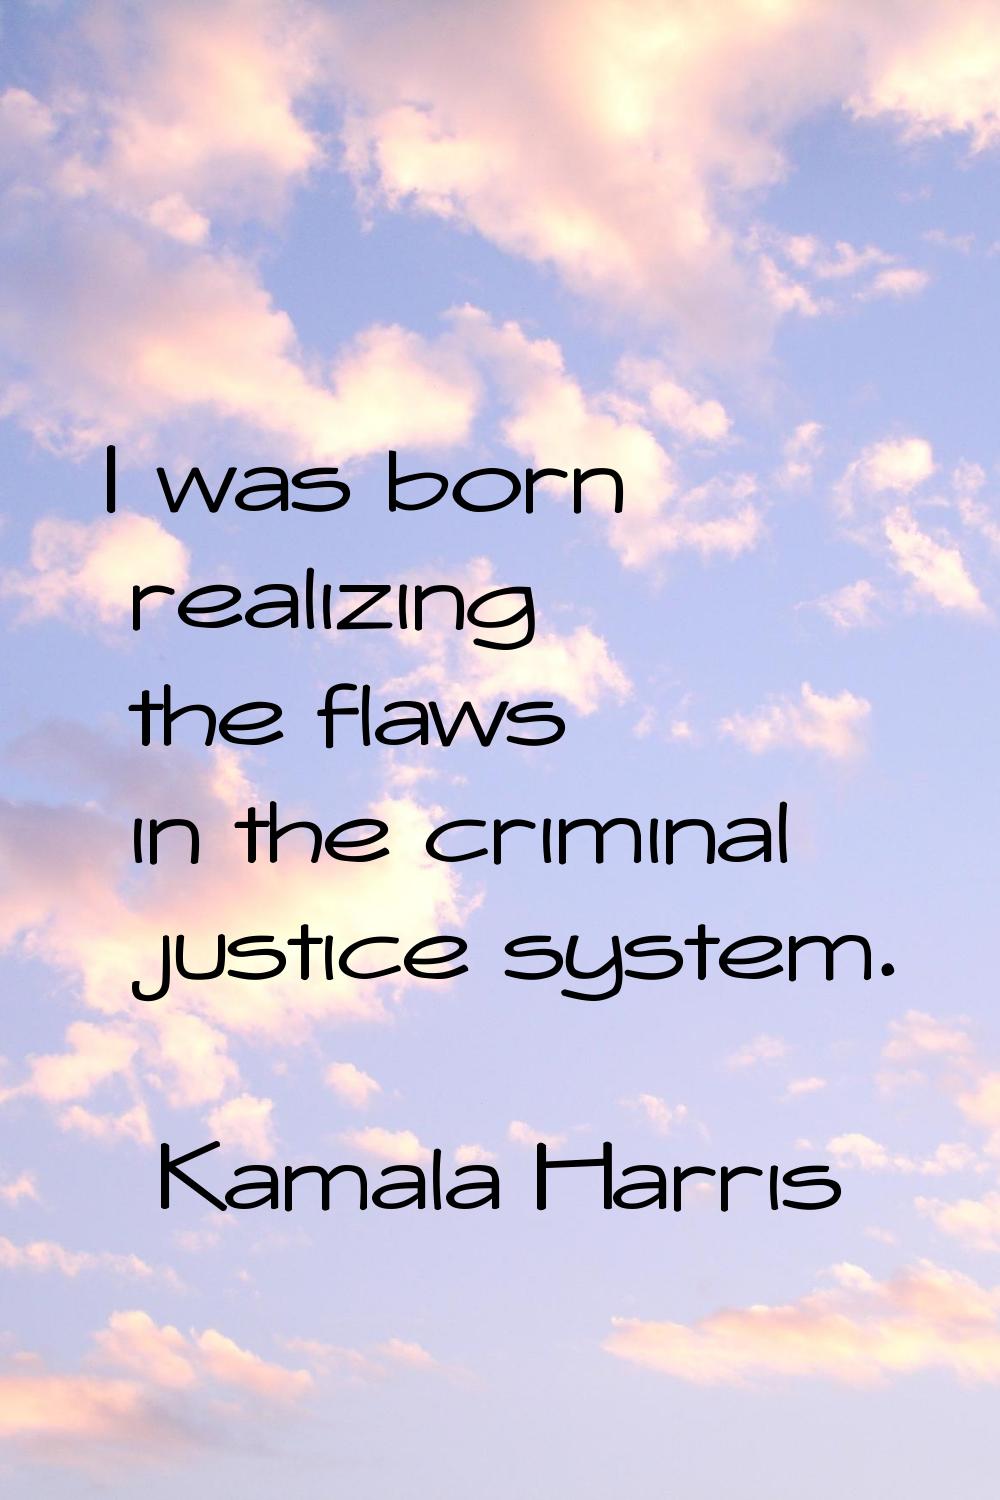 I was born realizing the flaws in the criminal justice system.